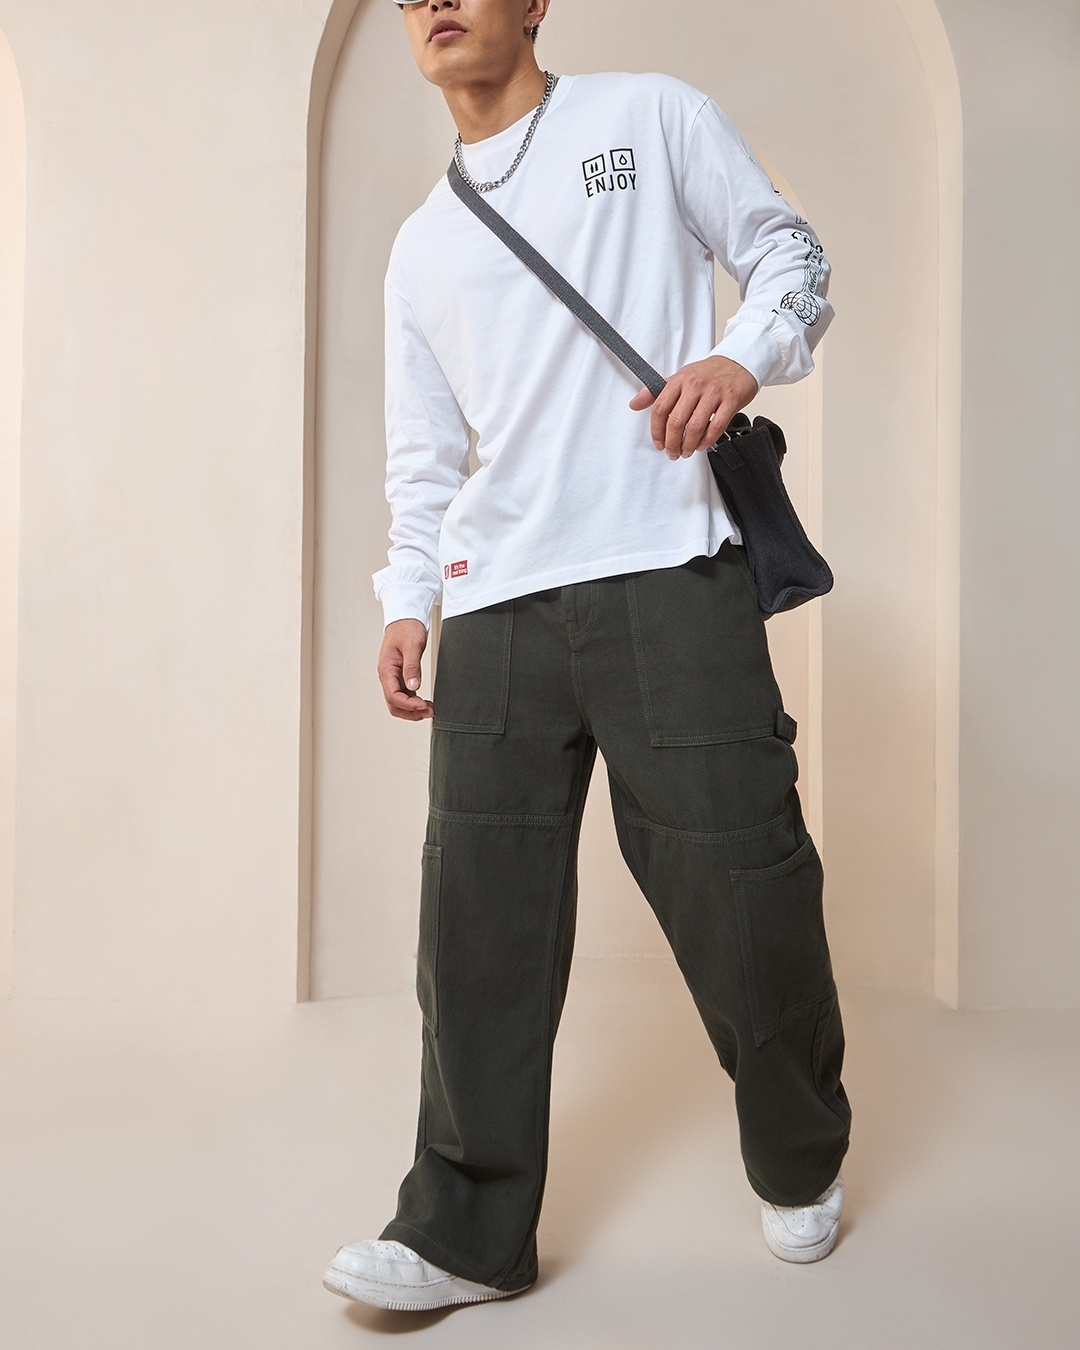 men wearing cargo pants with full sleeve t shirt